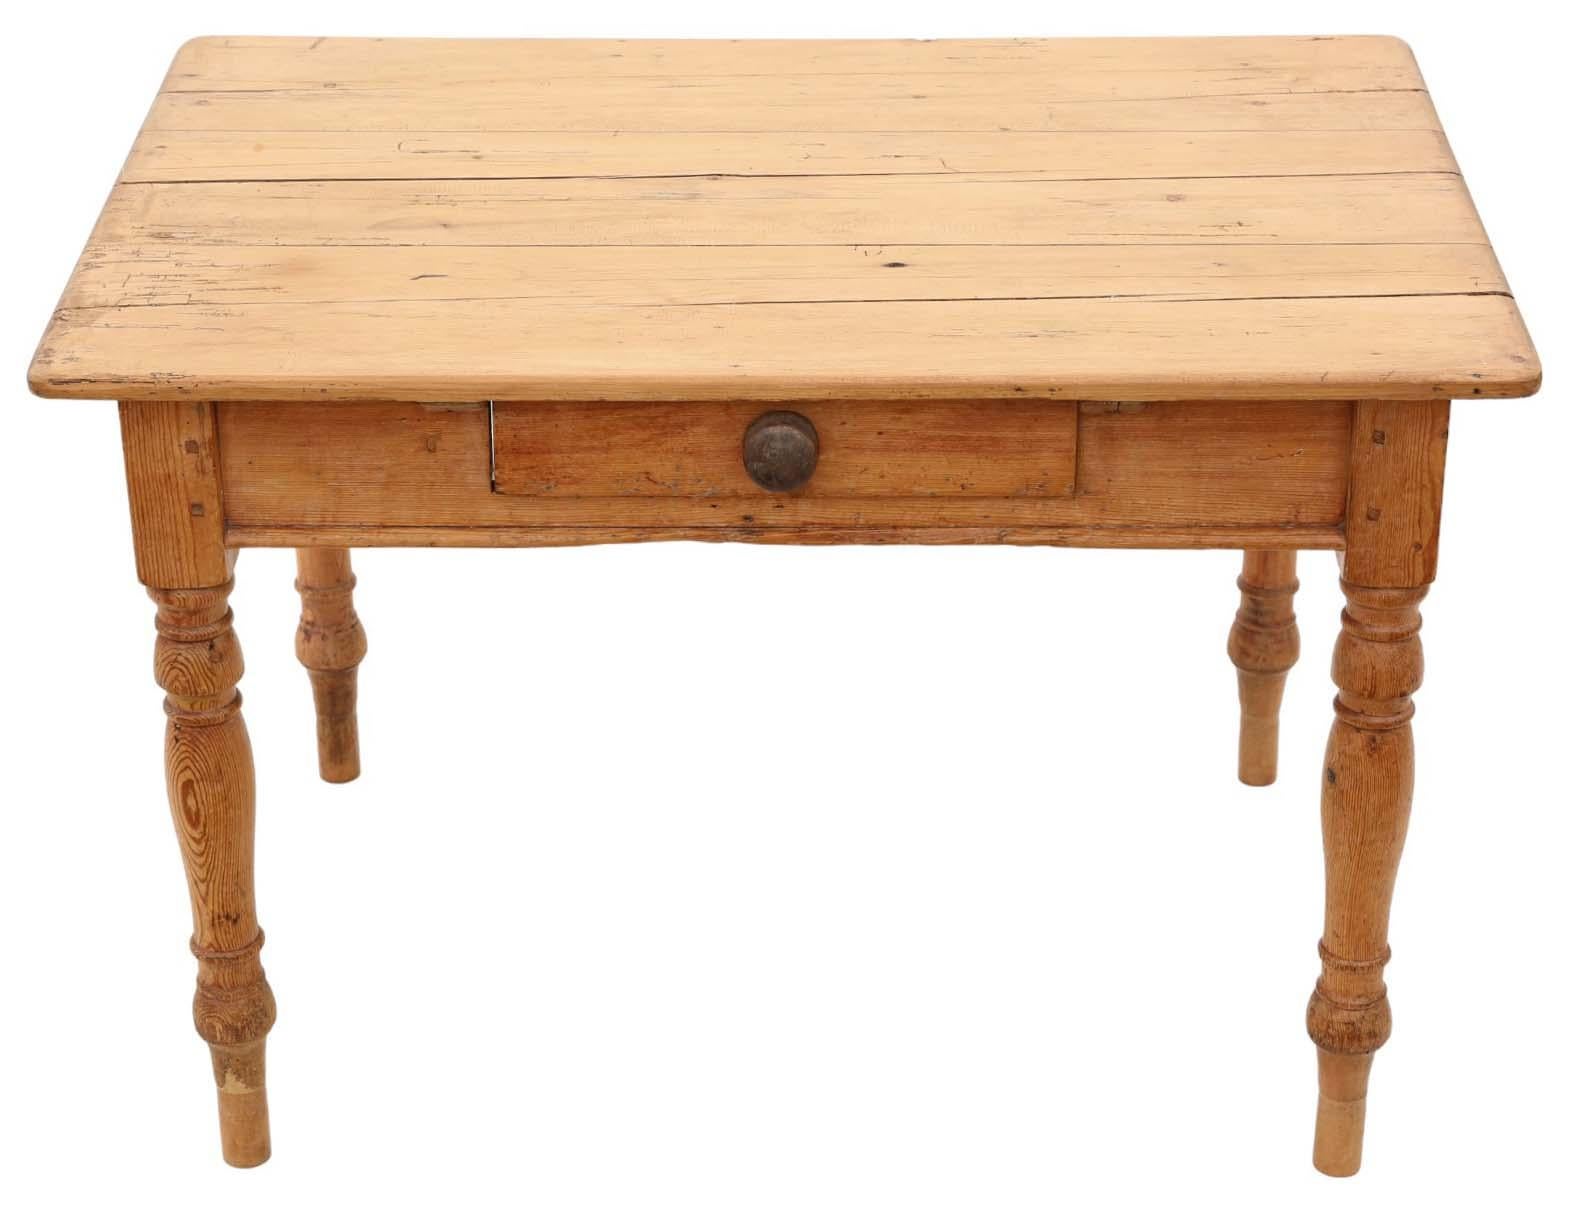 19th Century antique scrub top farmhouse kitchen dining table featuring a convenient drawer.

Boasting exceptional age, color, and patina.

Sturdy and robust, with no loose joints or woodworm issues.

Overall maximum dimensions:

Length: 117cm,